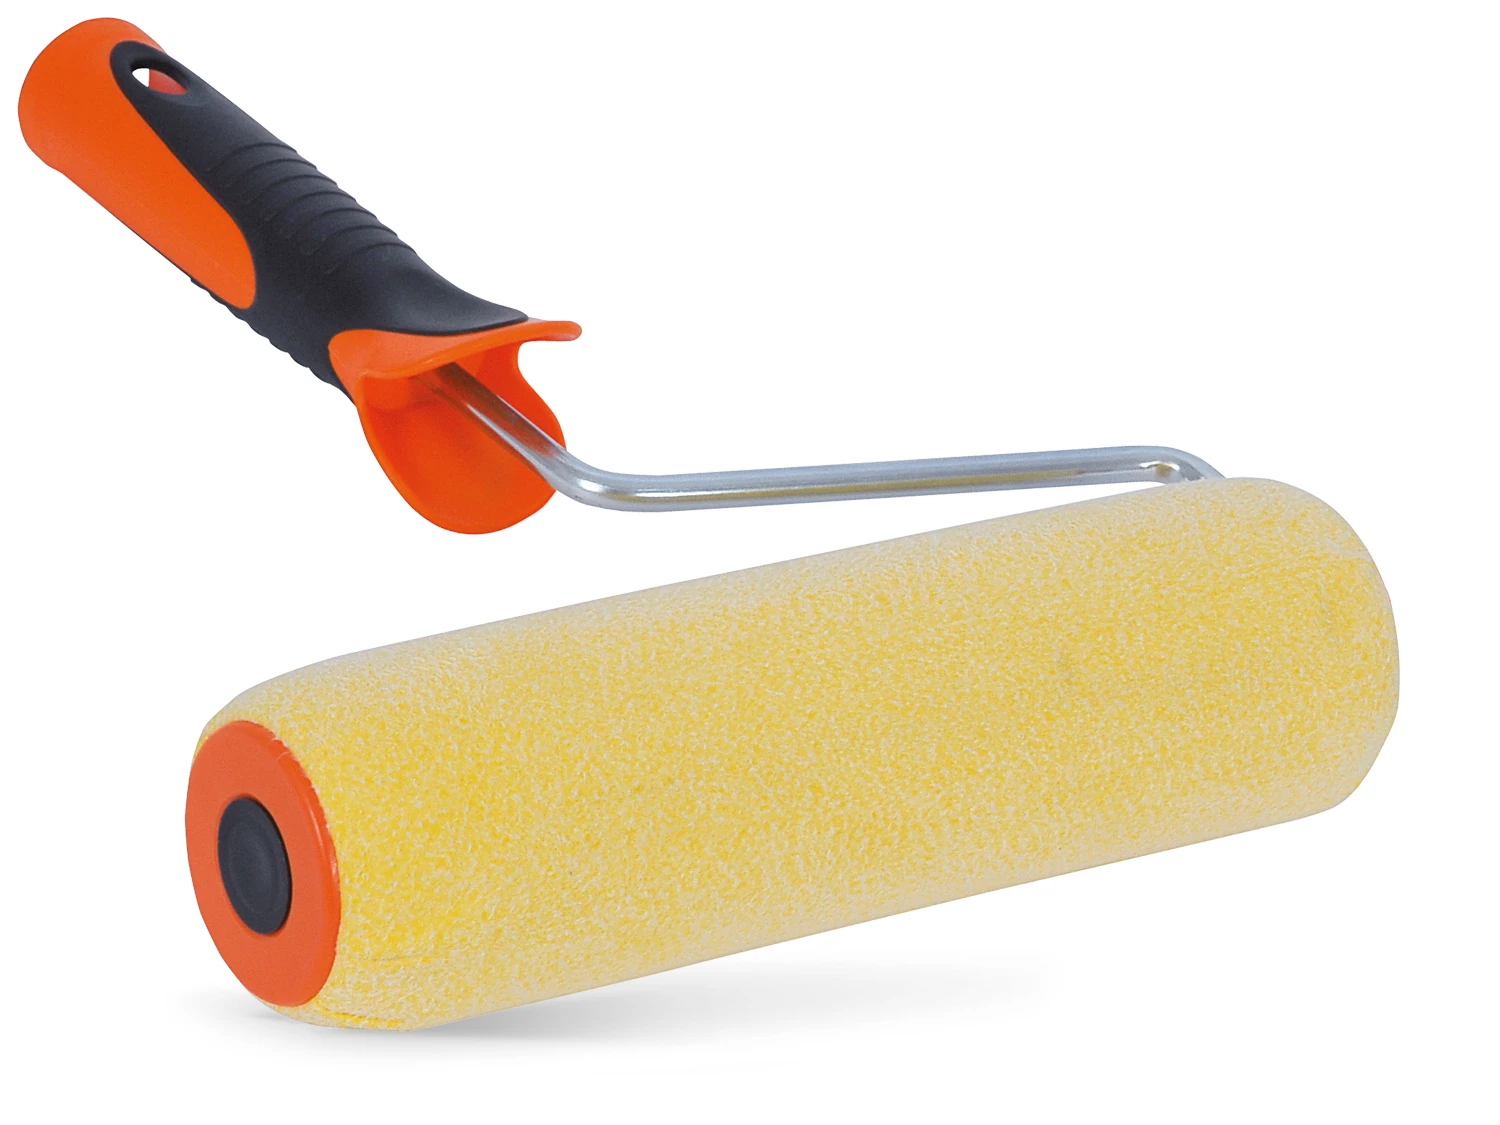 Z48 – PAINT ROLLER FOR HIGH ABSORPTION